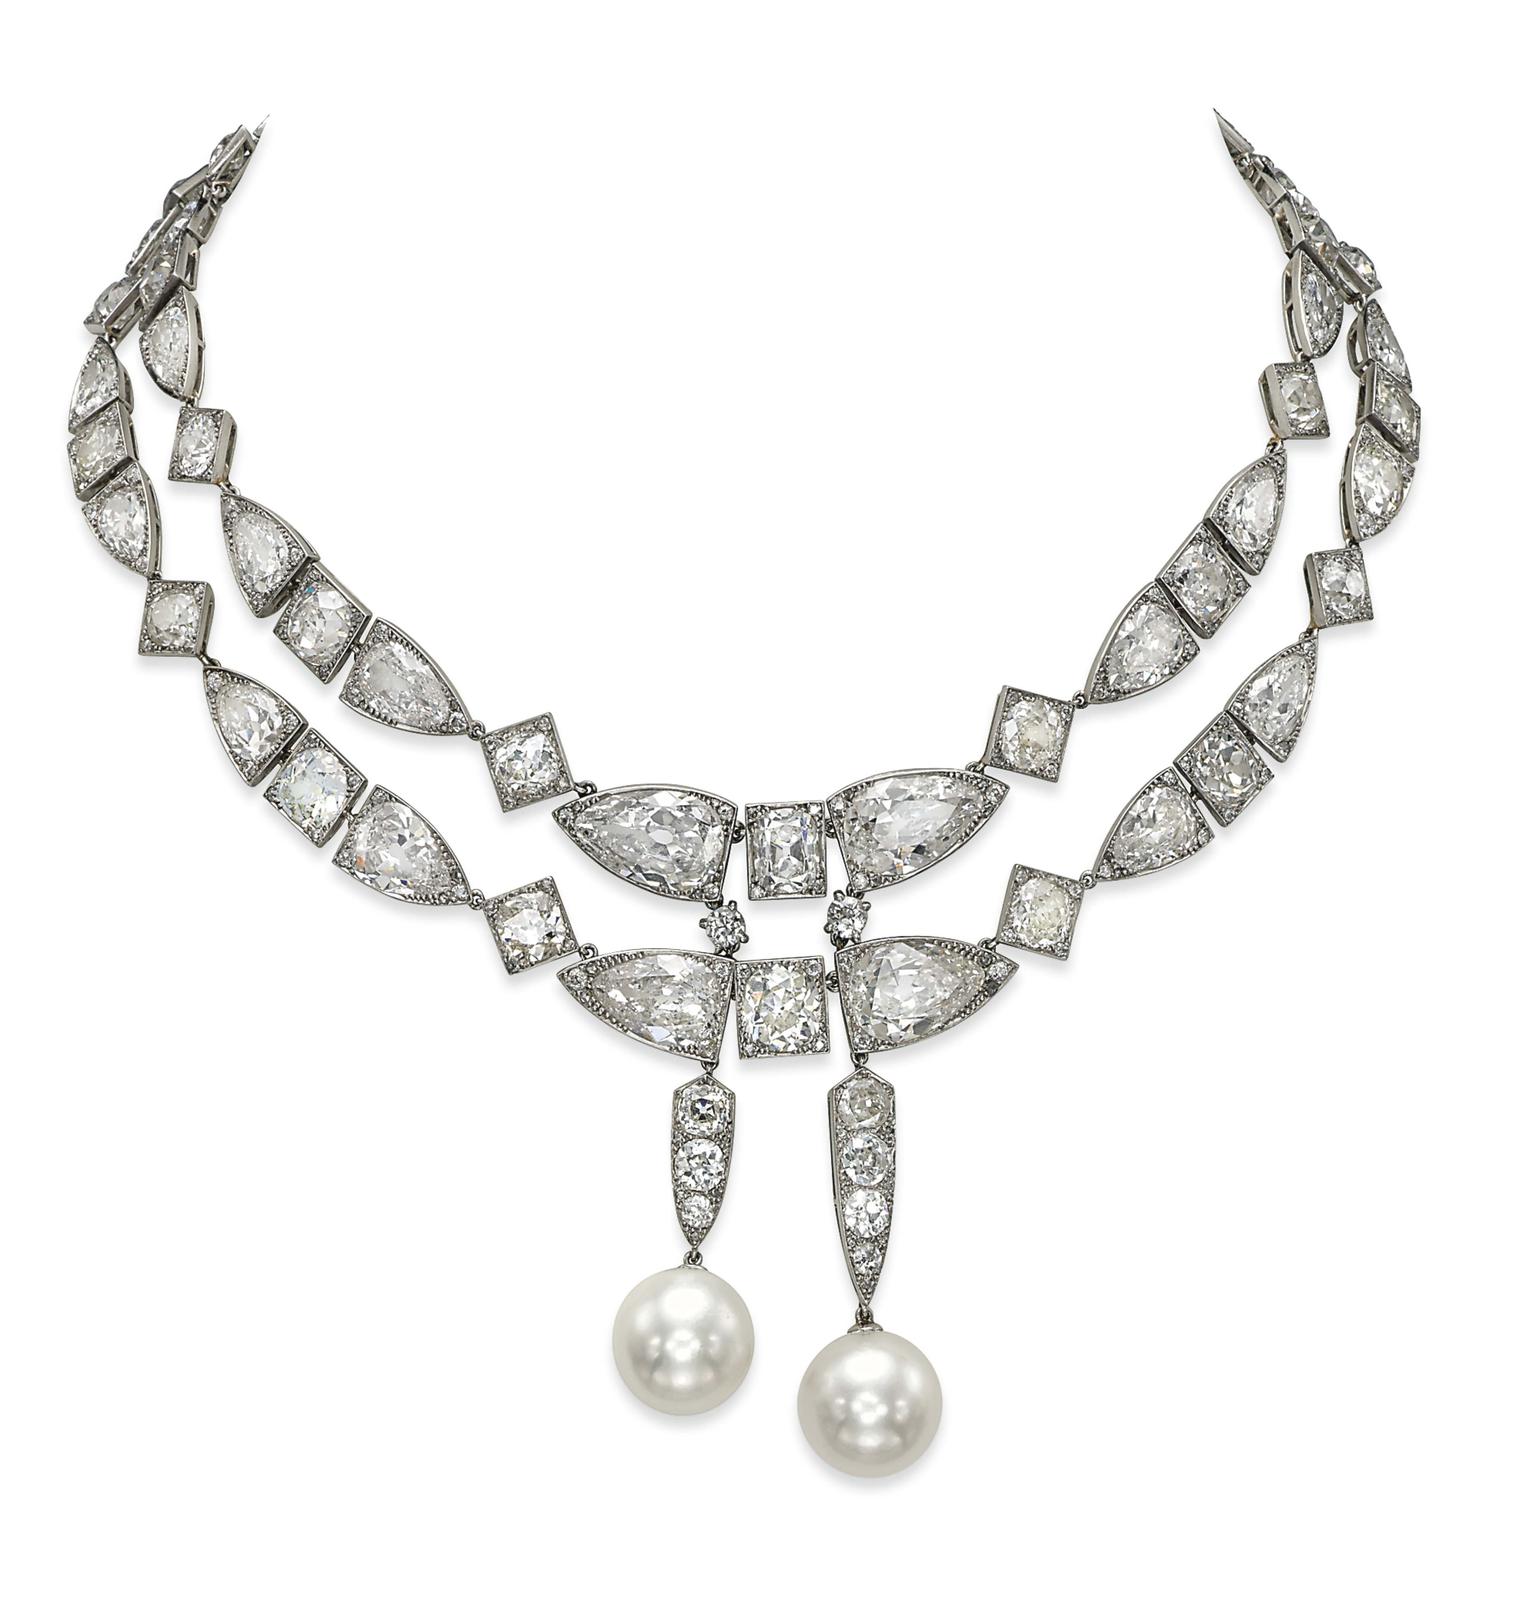 Also of note is an Art Deco natural pearl and diamond necklace from the private collection of Baroness Edouard de Rothschild, which sold for $5.19 million, more than five times its pre-sale estimate.